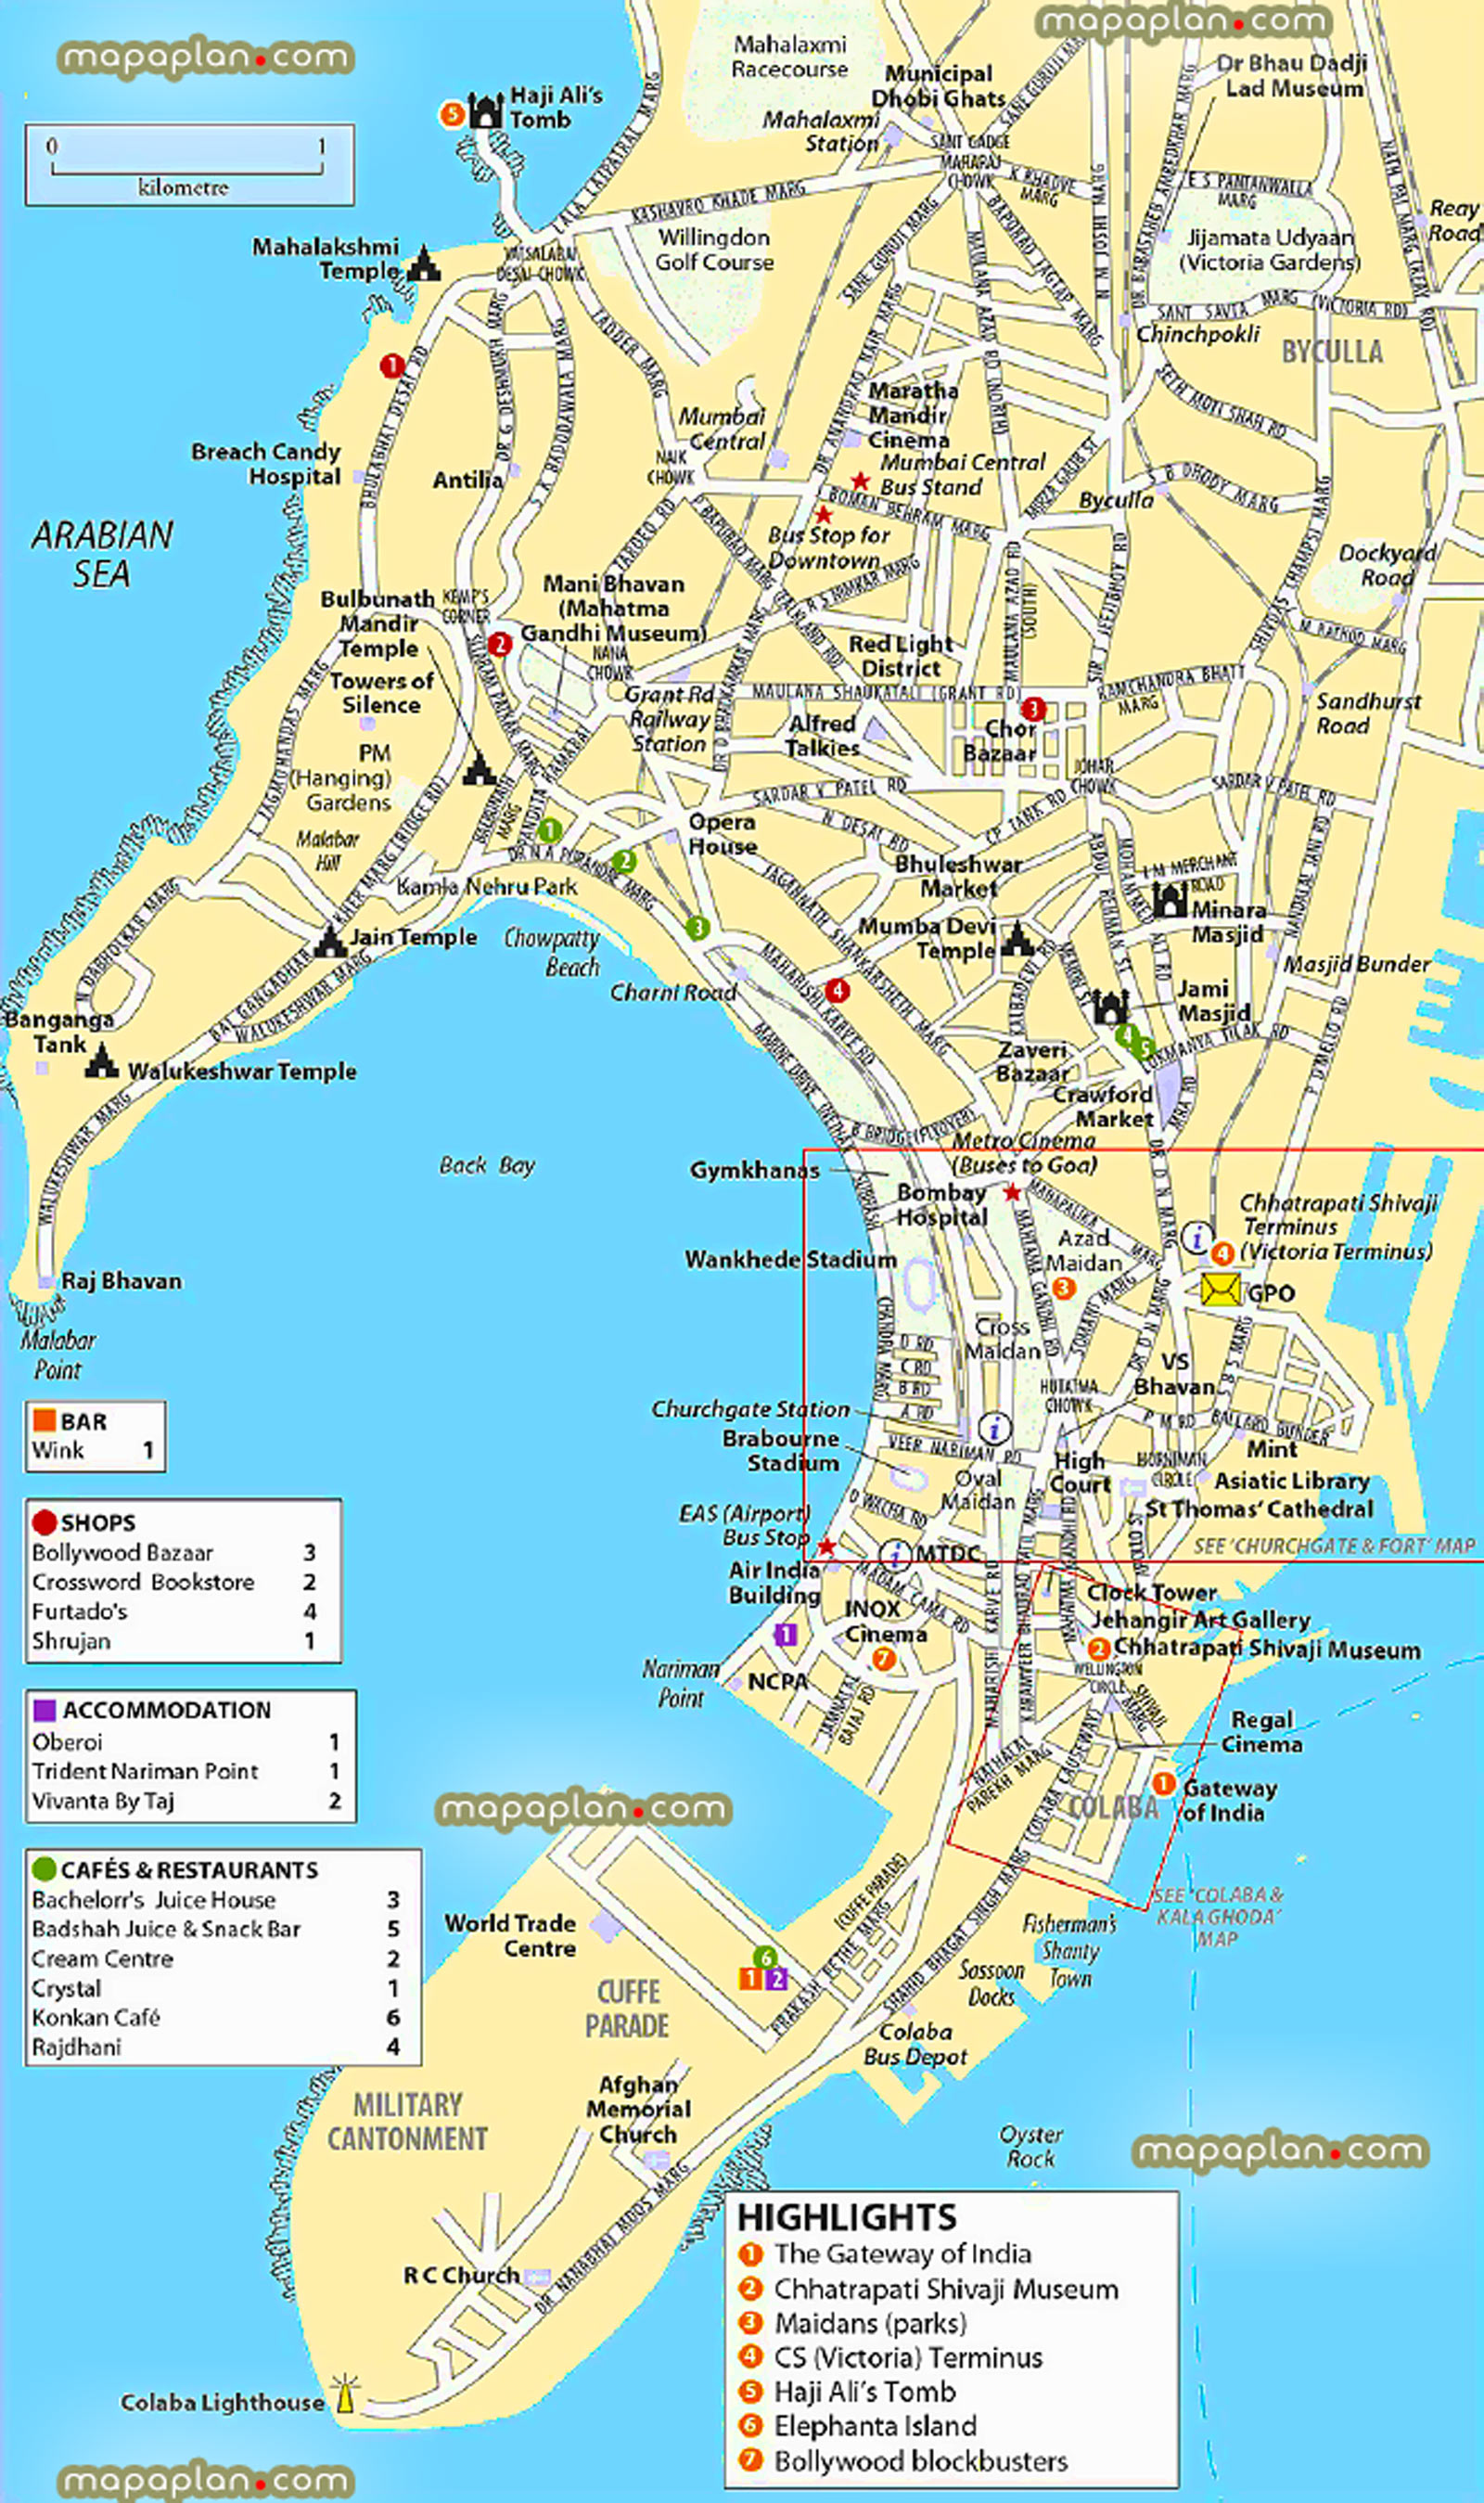 old new mumbai detailed interactive itinerary planner list top things visit see restaurants hotels shopping city detailed street names around central areas walking tour directions famous points interest printable detailed travel visitors itinerary planner best sights visits Mumbai Top tourist attractions map